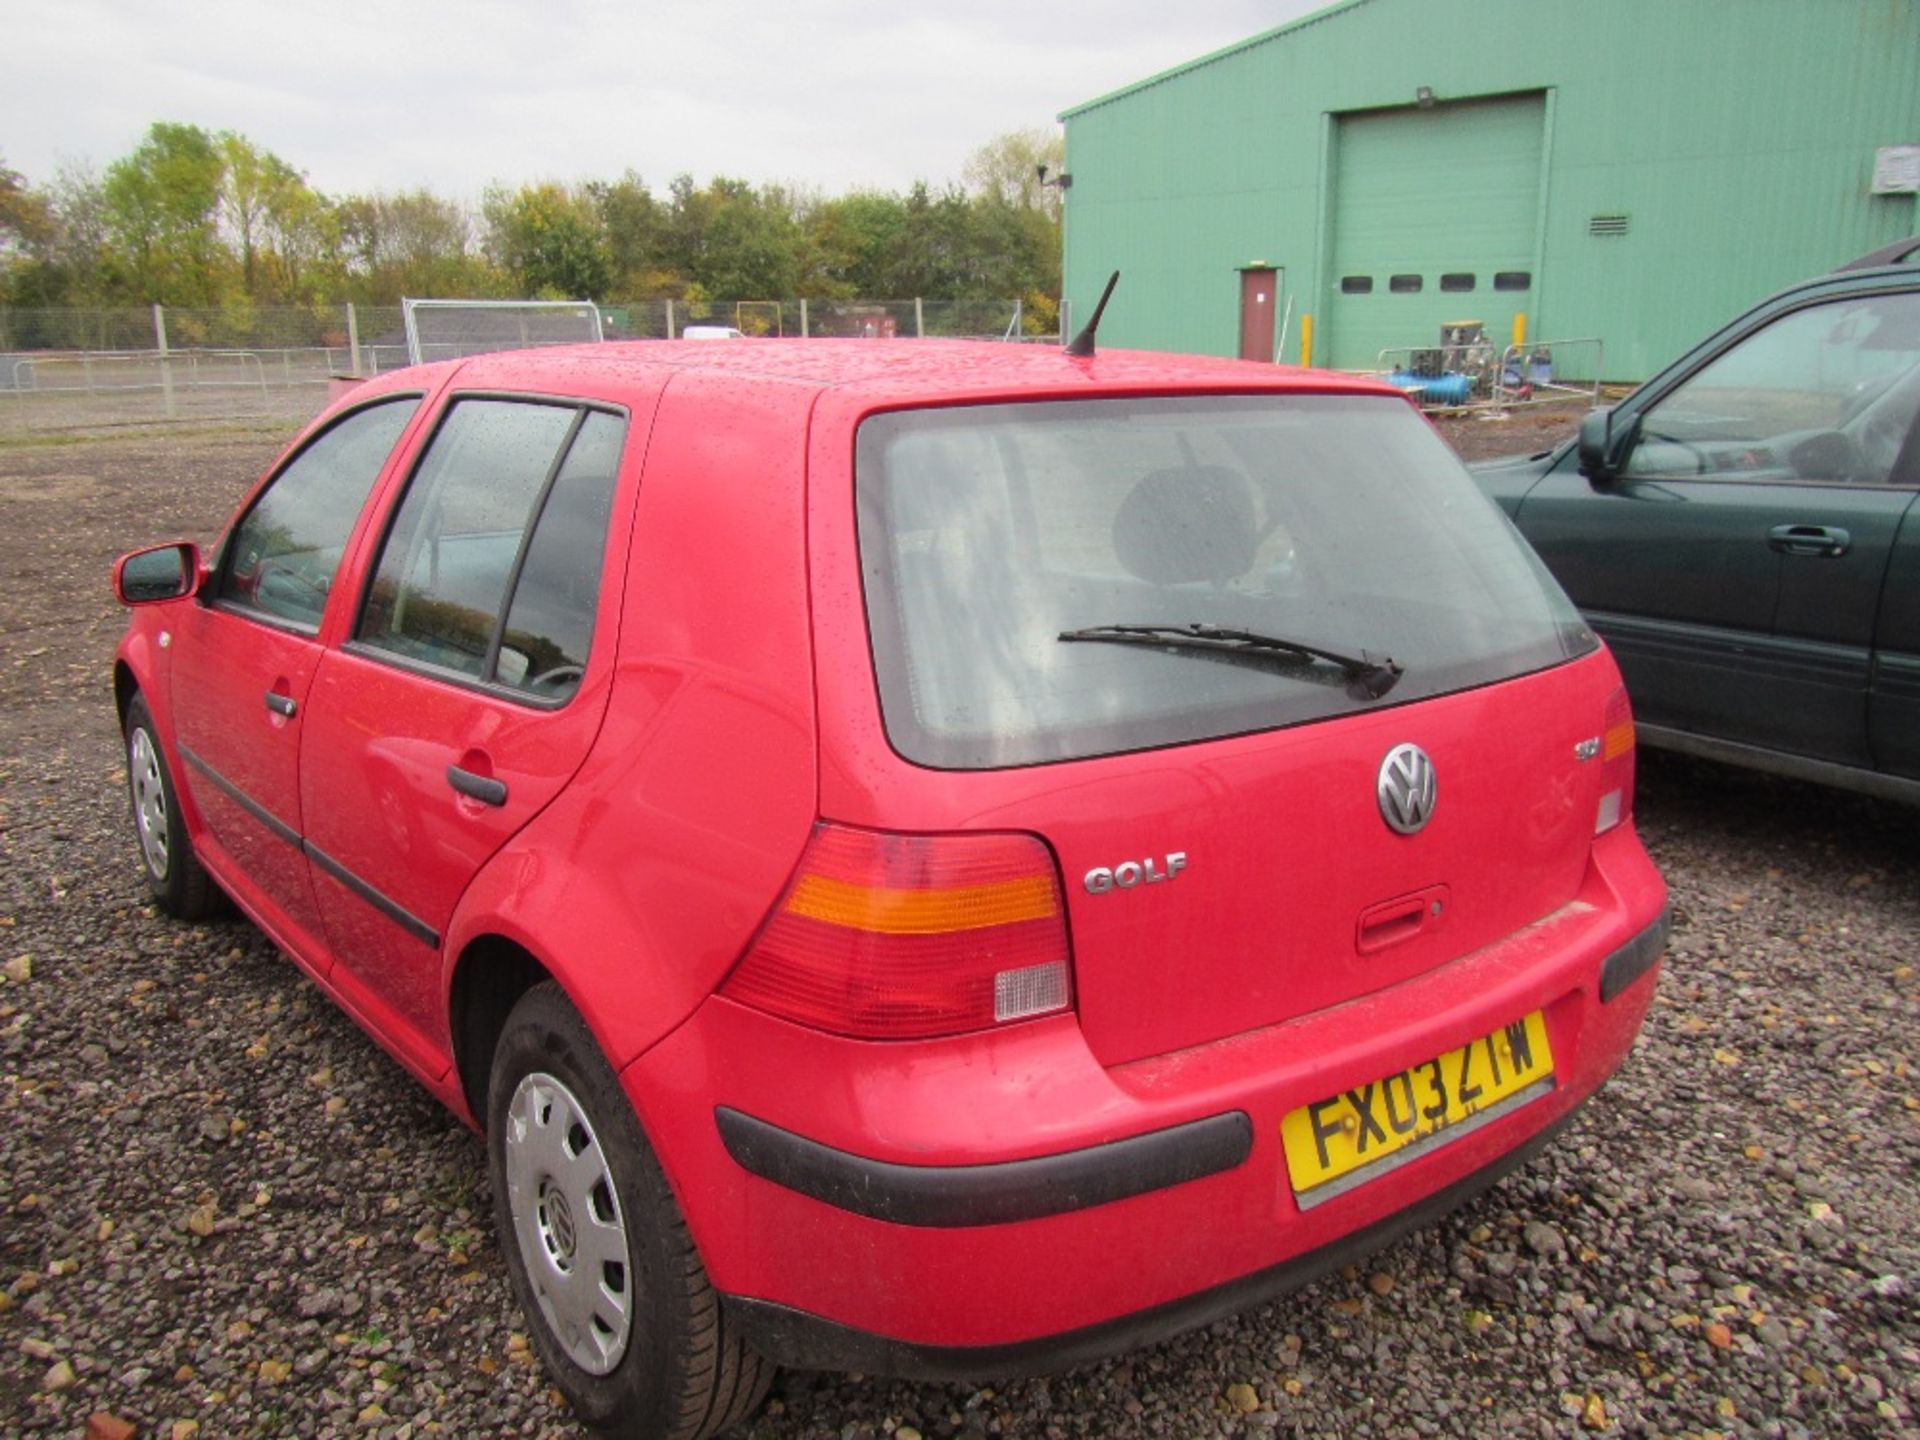 VW Golf E SDI 1.9 5 Door with Part Service History. Reg Docs will be supplied. Mileage: 137,658. MOT - Image 4 of 4